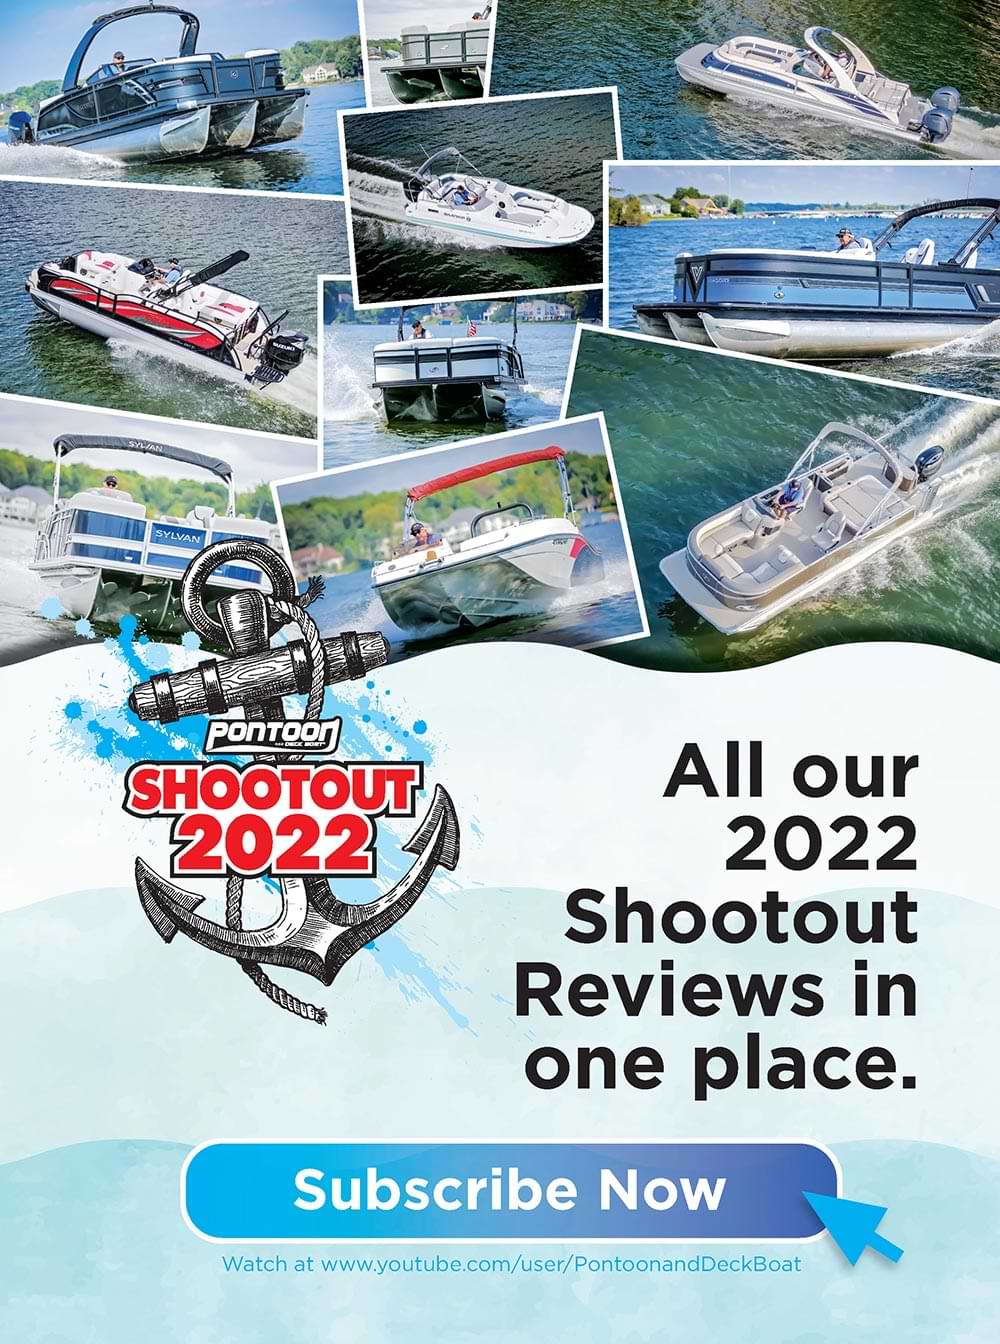 Pontoon and Deck Boat Shootout 2022 Subscribe Now Advertisement